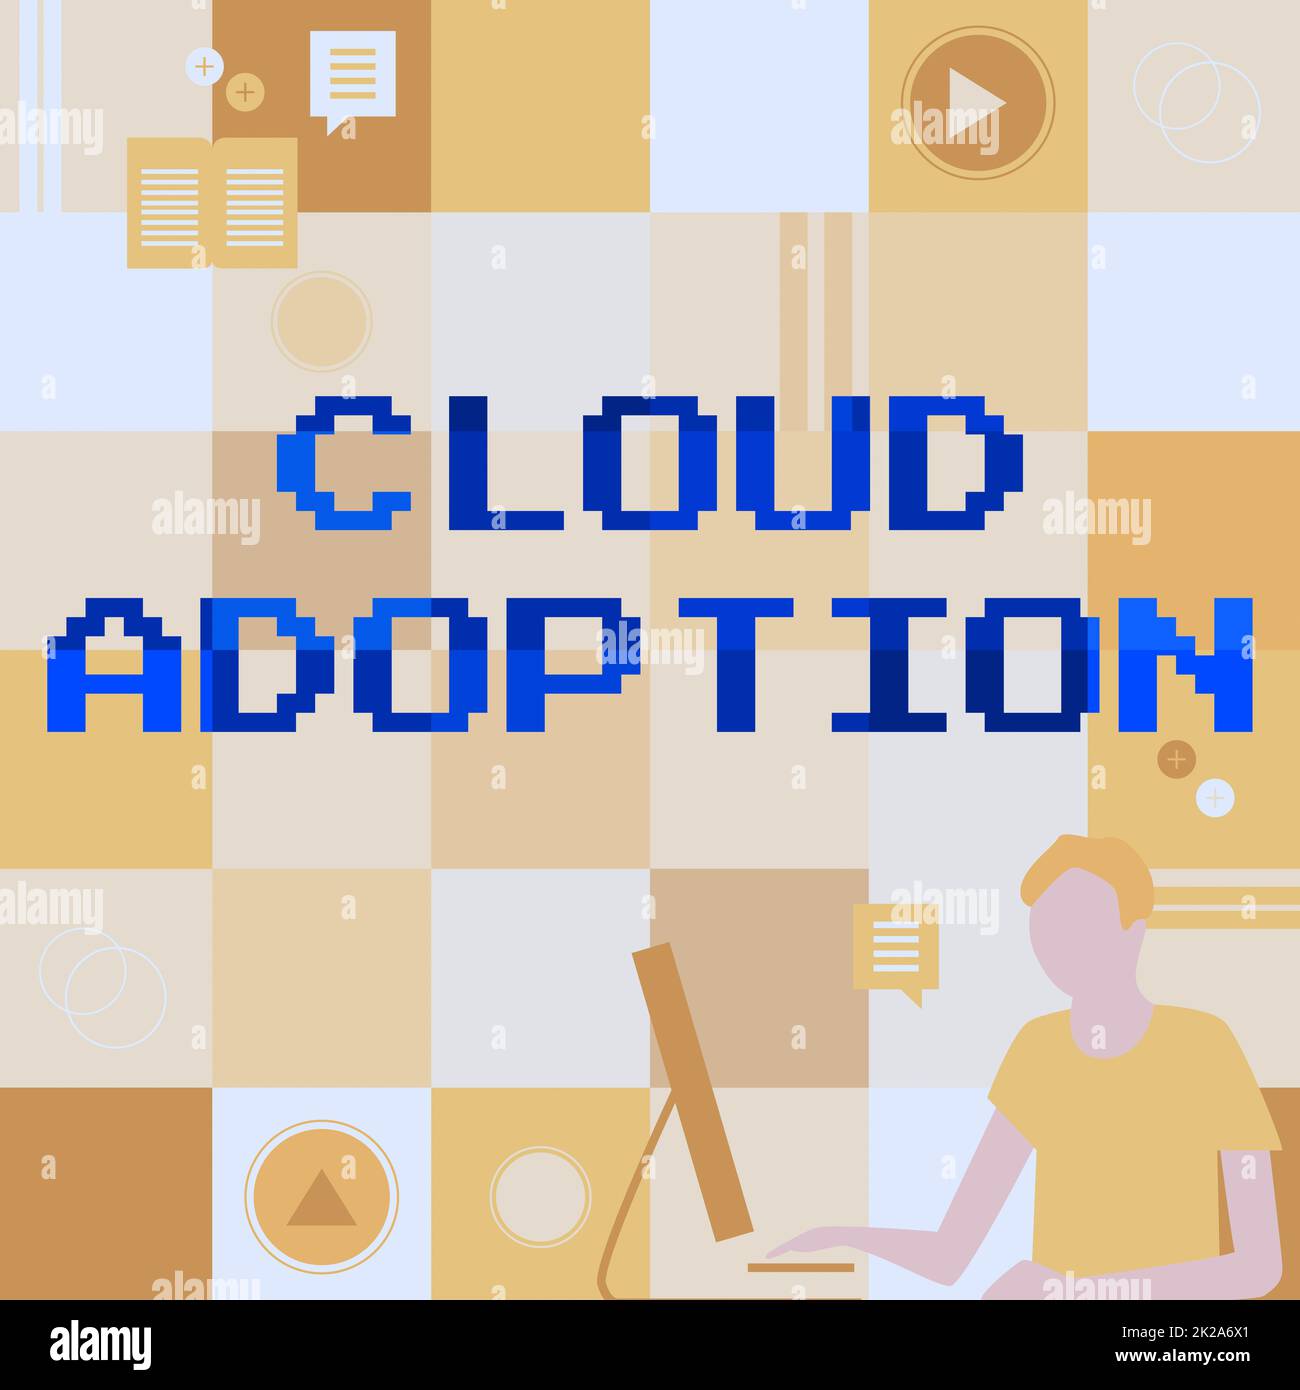 Text showing inspiration Cloud Adoption. Internet Concept strategic move by organisations of reducing cost and risk Businessman Innovative Thinking Leading Ideas Towards Stable Future. Stock Photo